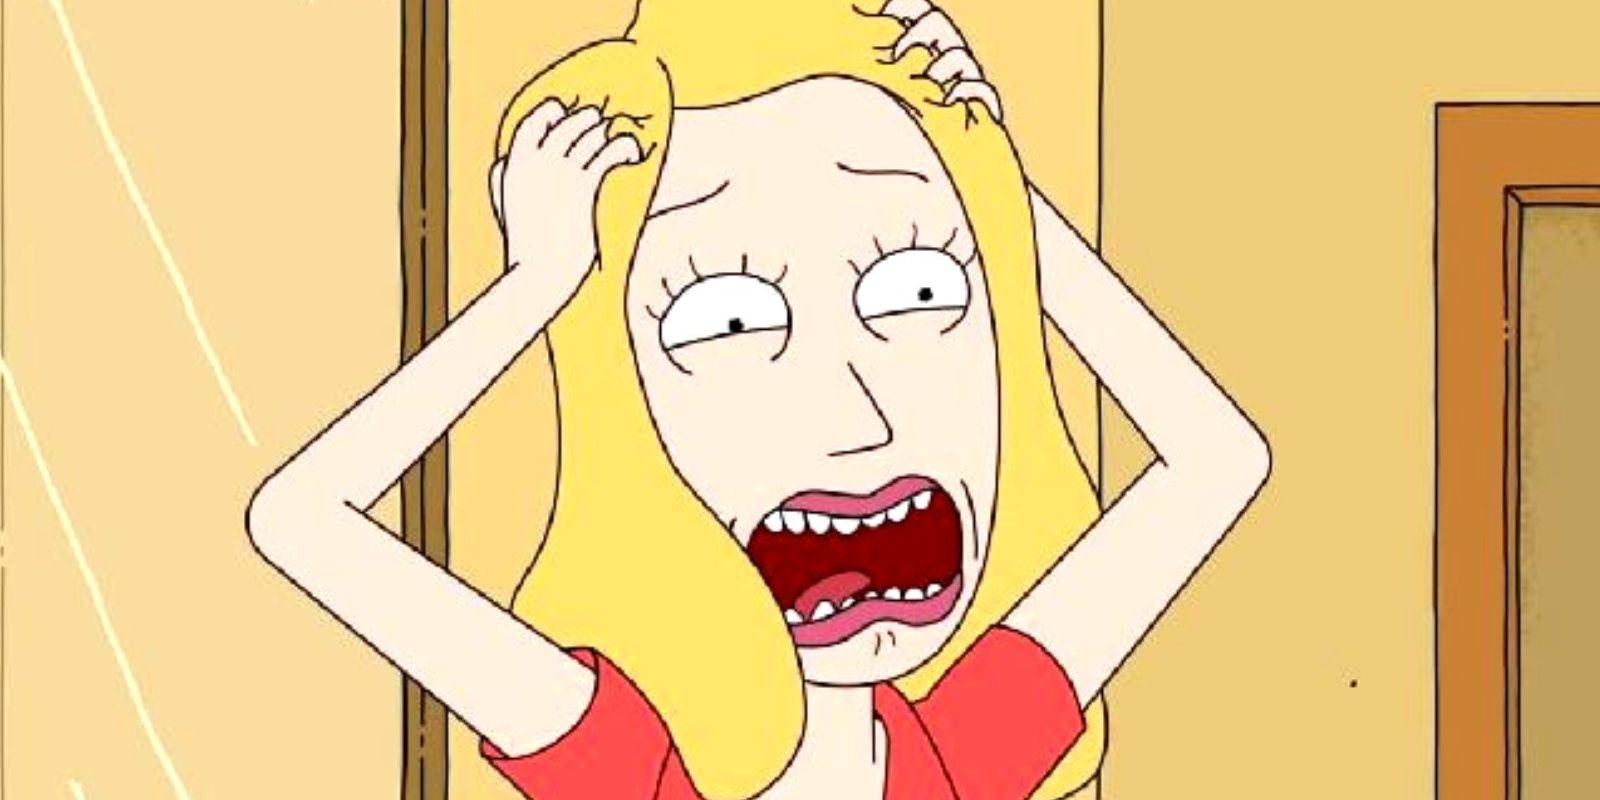 Beth in Rick and Morty